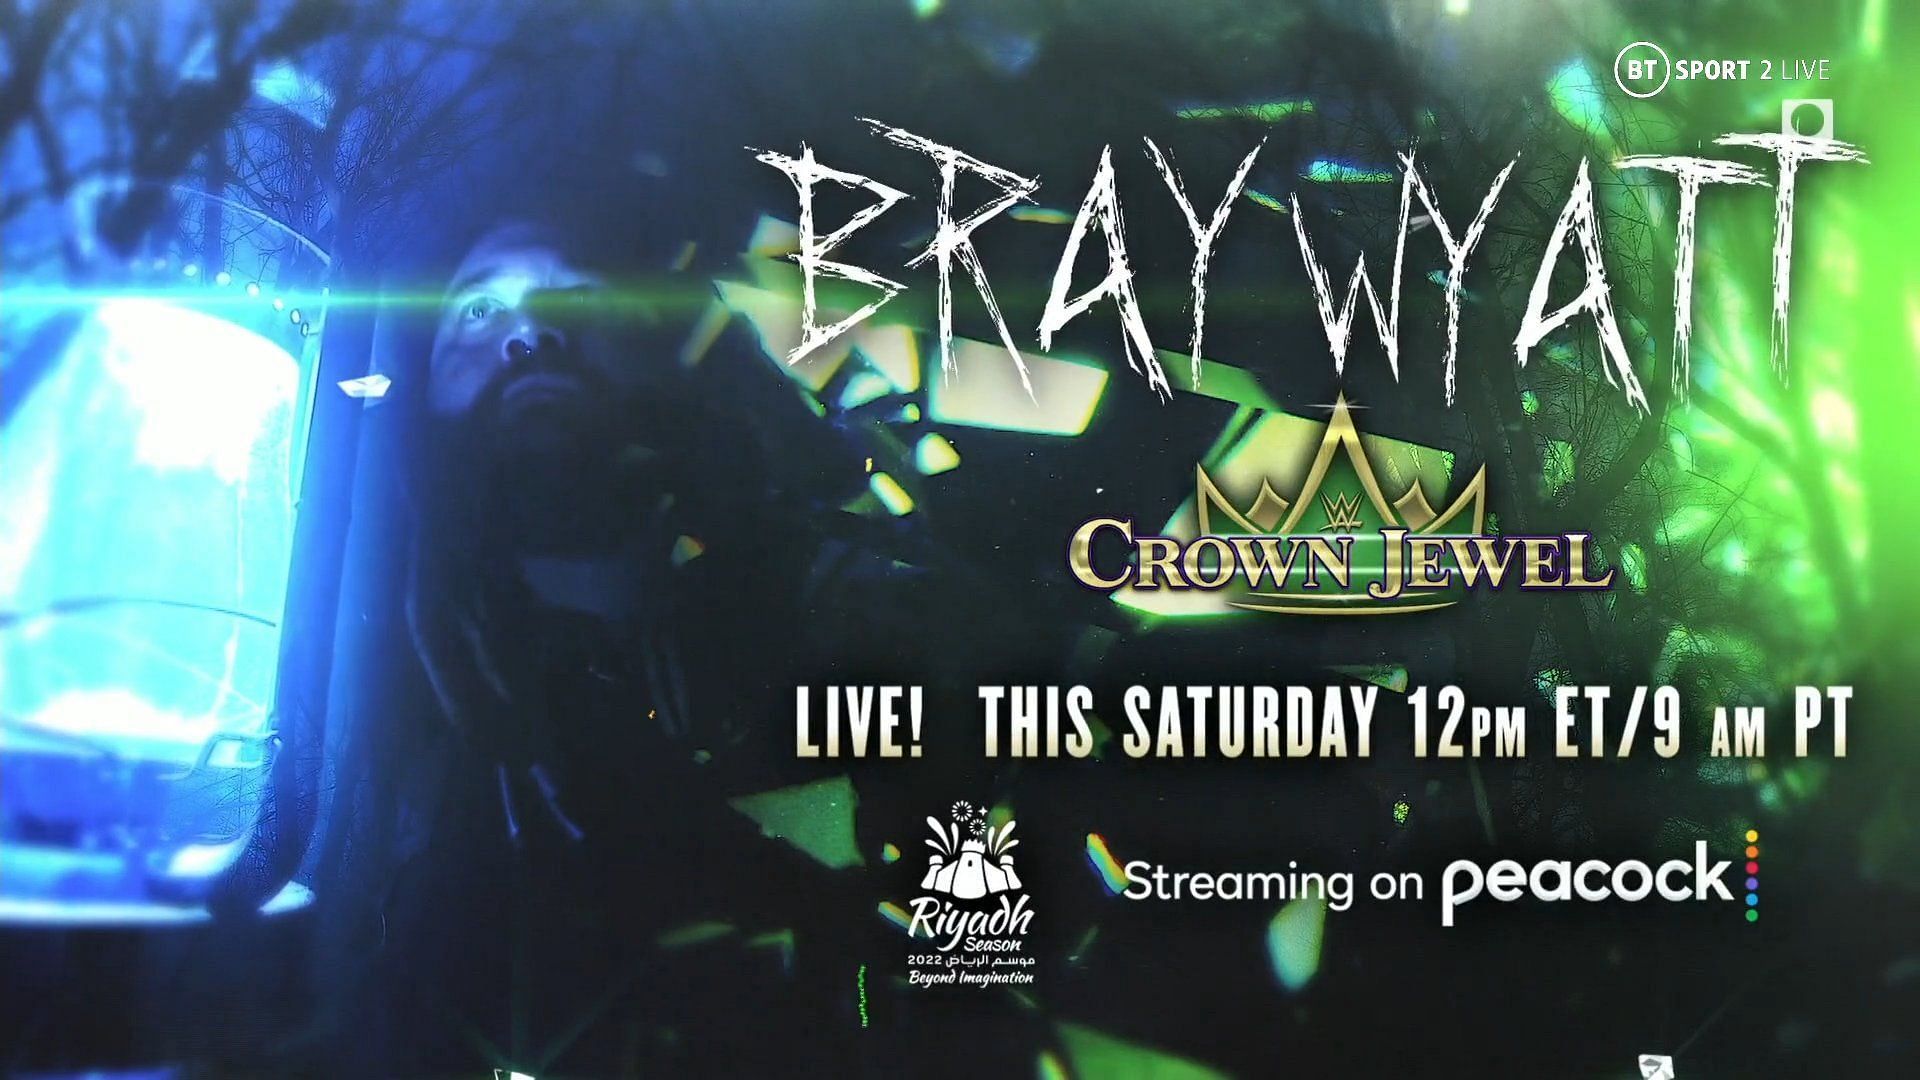 Bray Wyatt will be appearing this Saturday at Crown Jewel